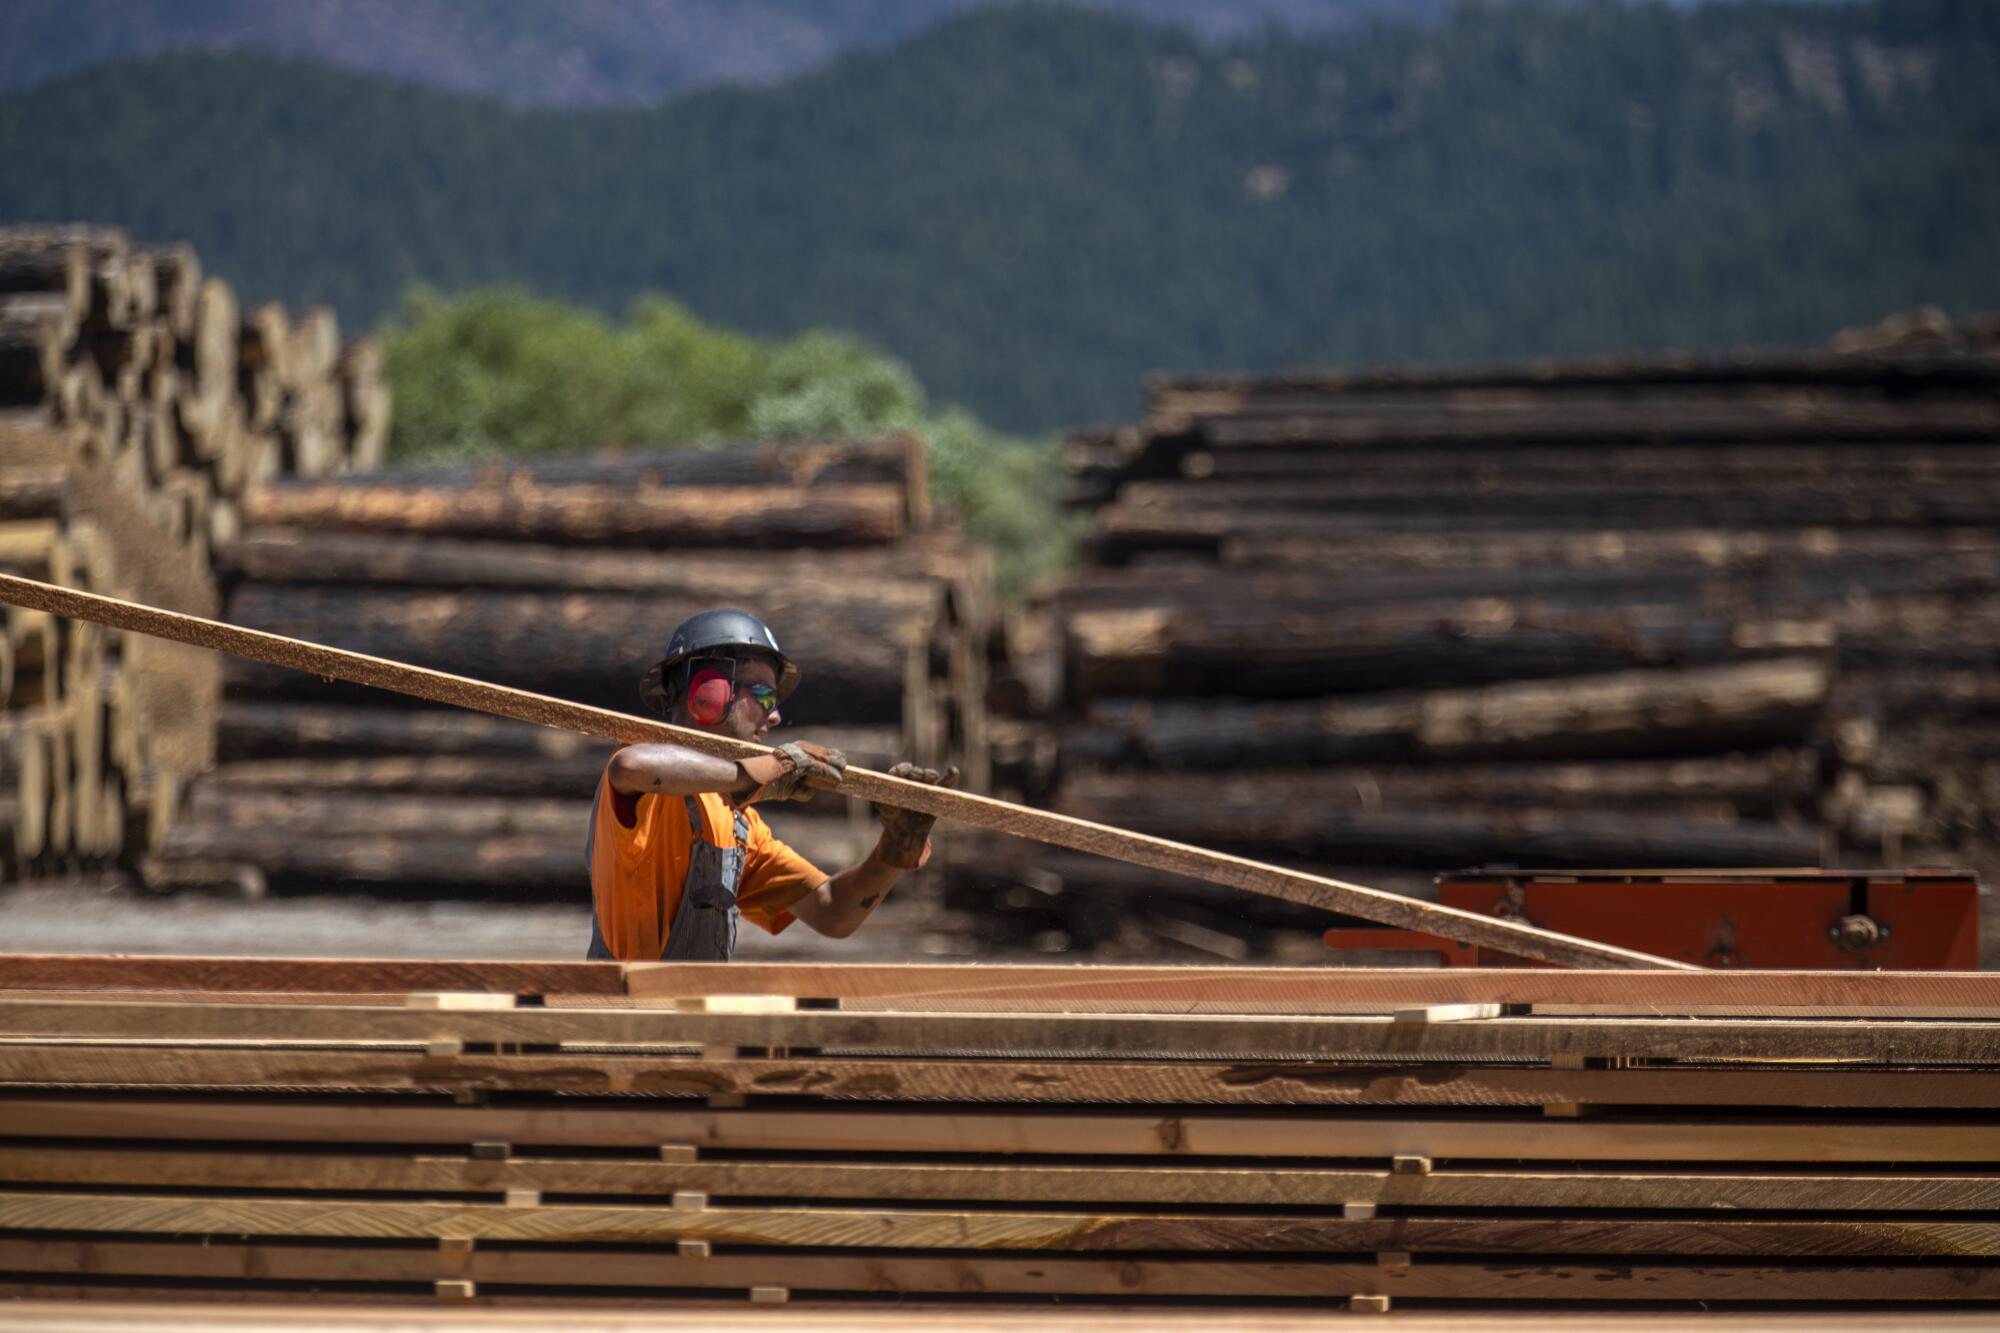 J&C Lumber is a fourth-generation family-owned timber harvesting company located near Greenville. 